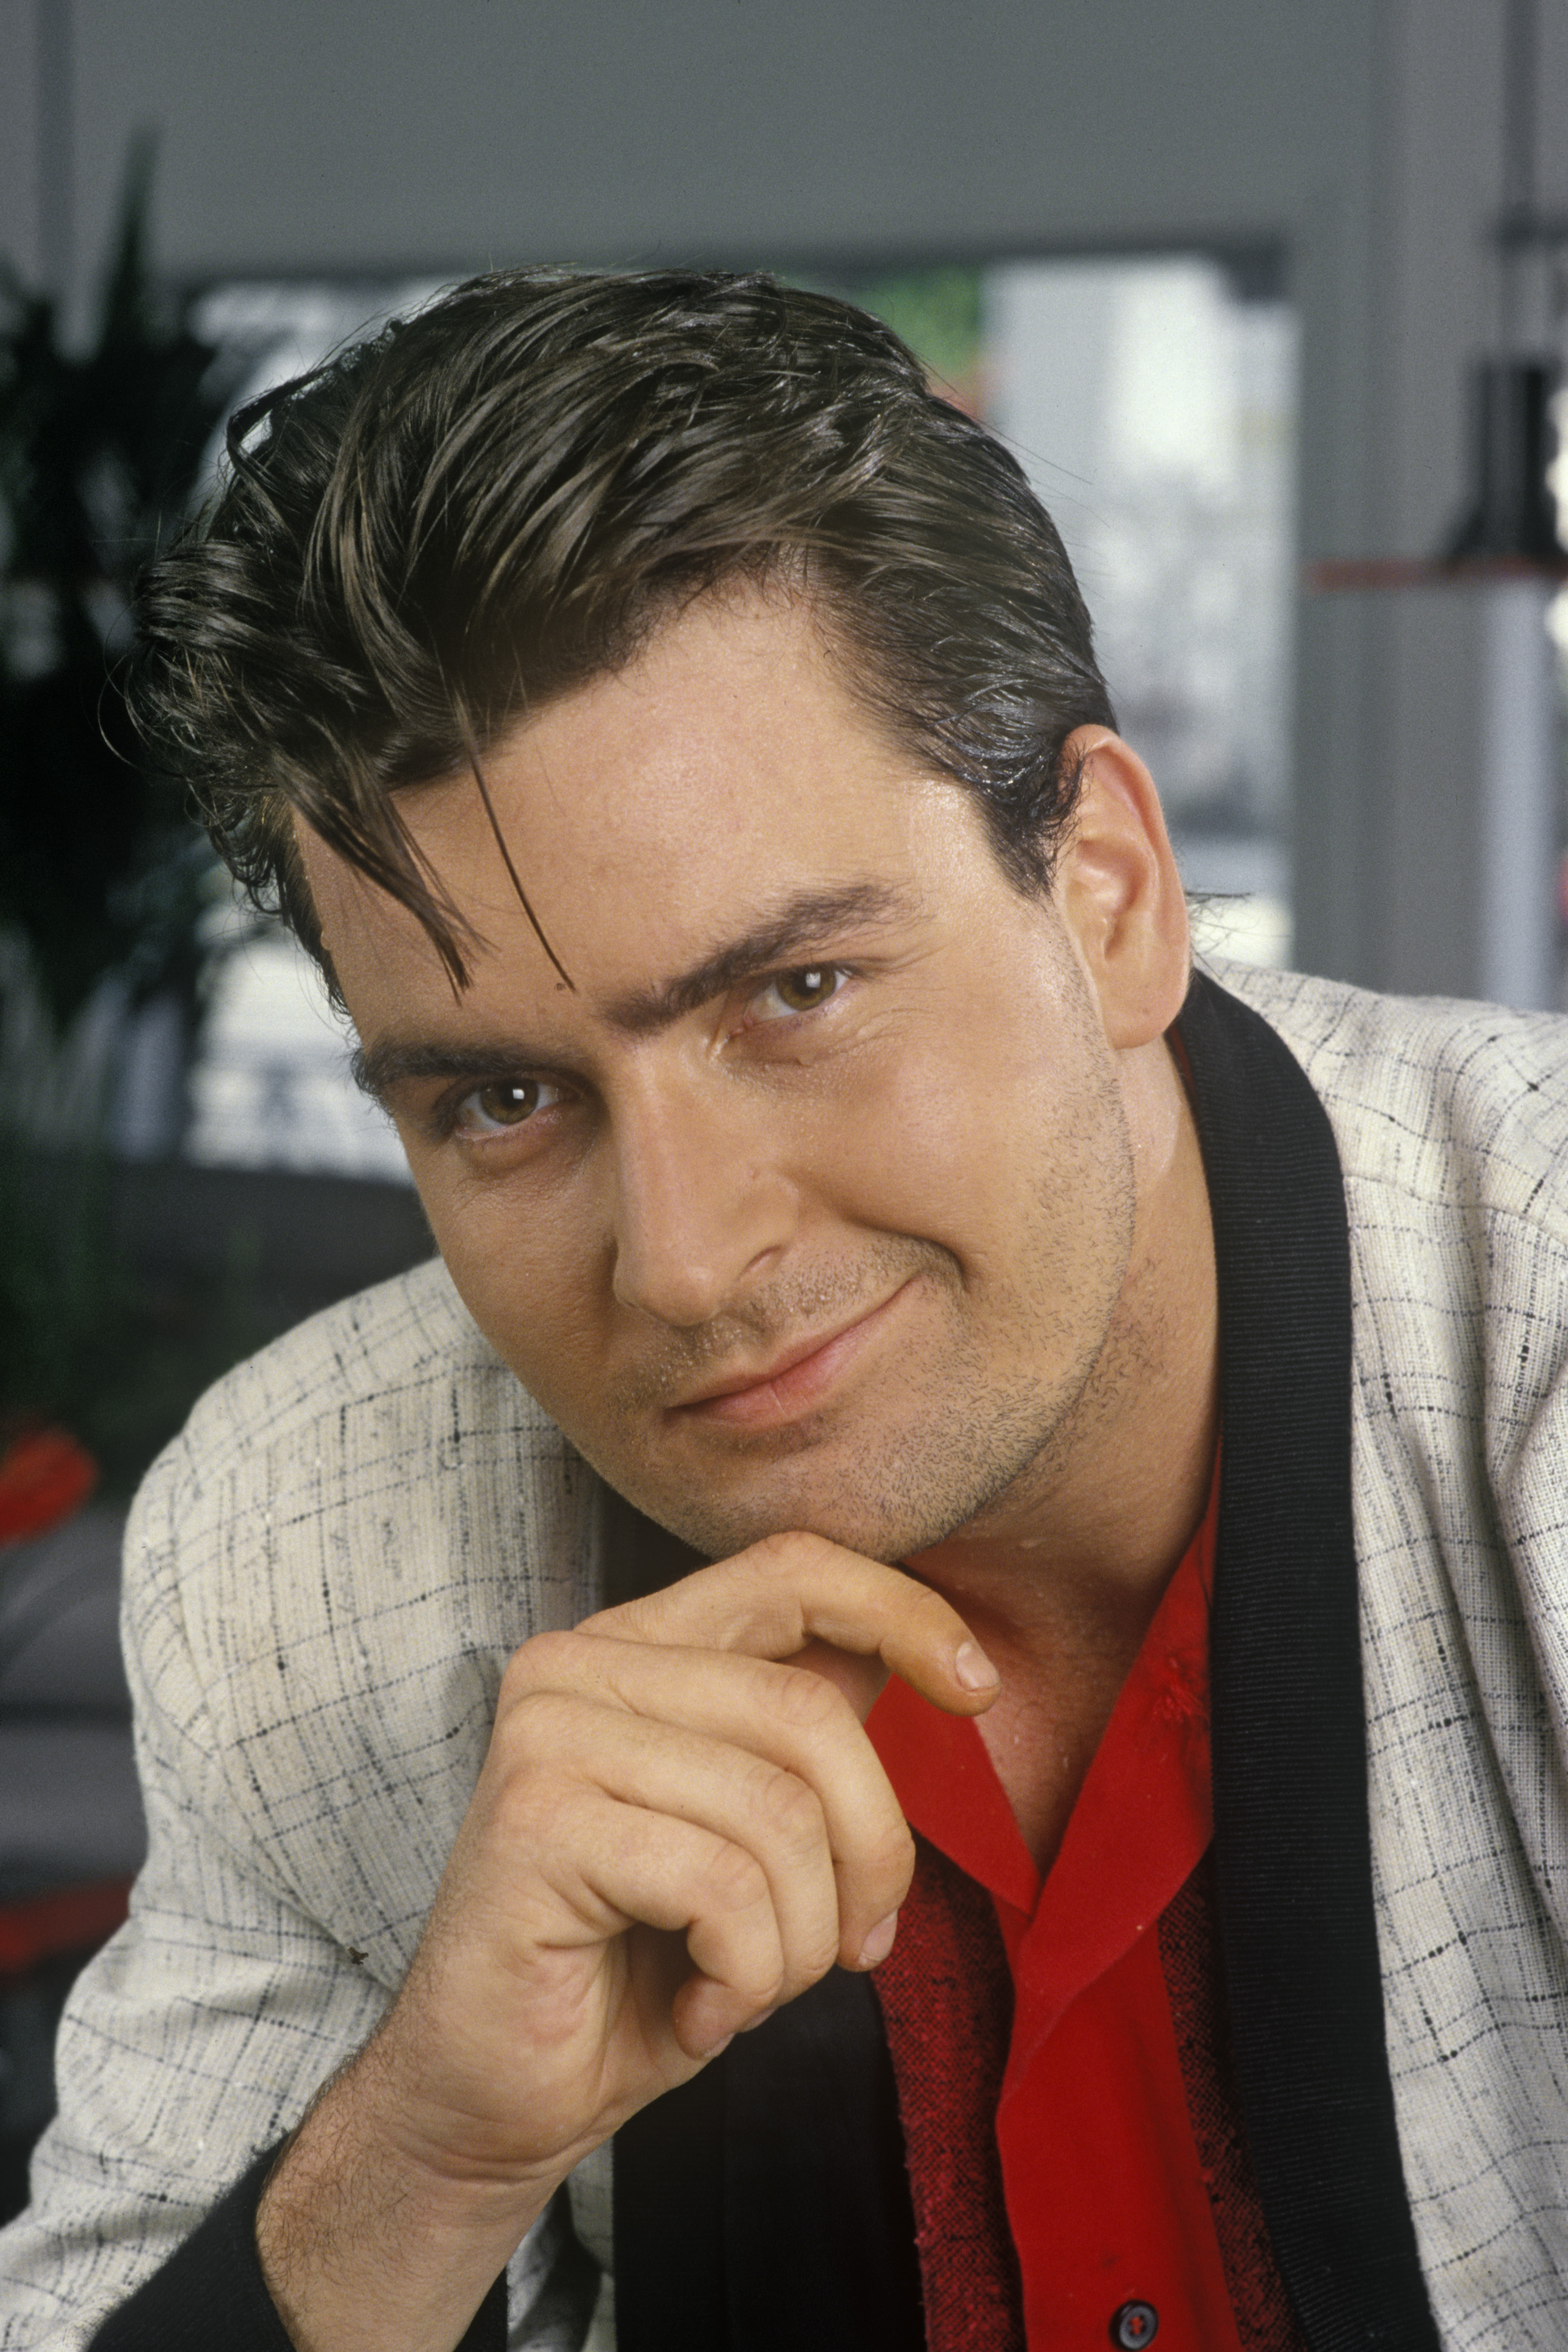 Charlie Sheen poses for a portrait in 1990 in Malibu, California | Source: Getty Images